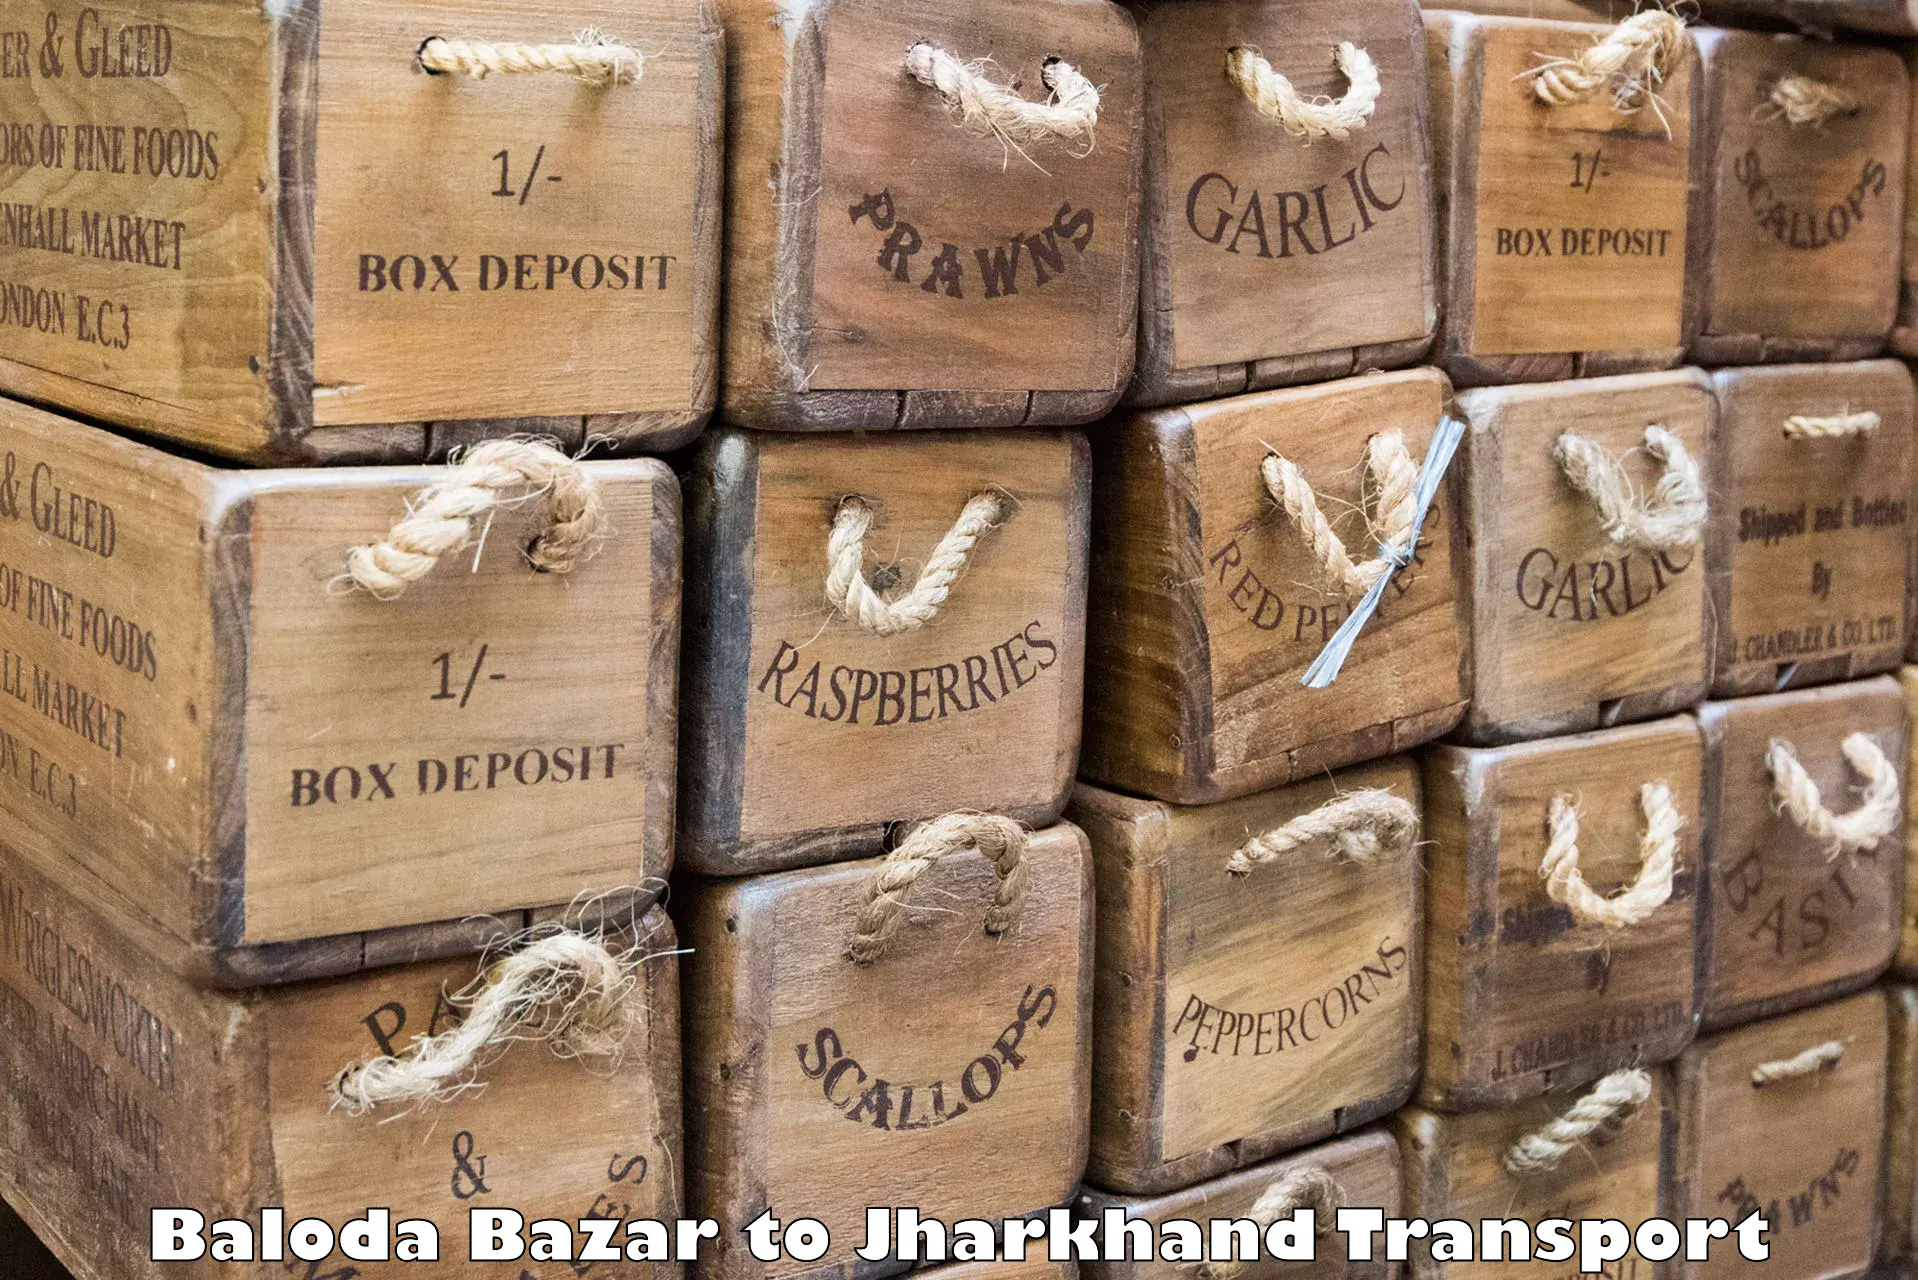 Container transport service Baloda Bazar to Jharkhand